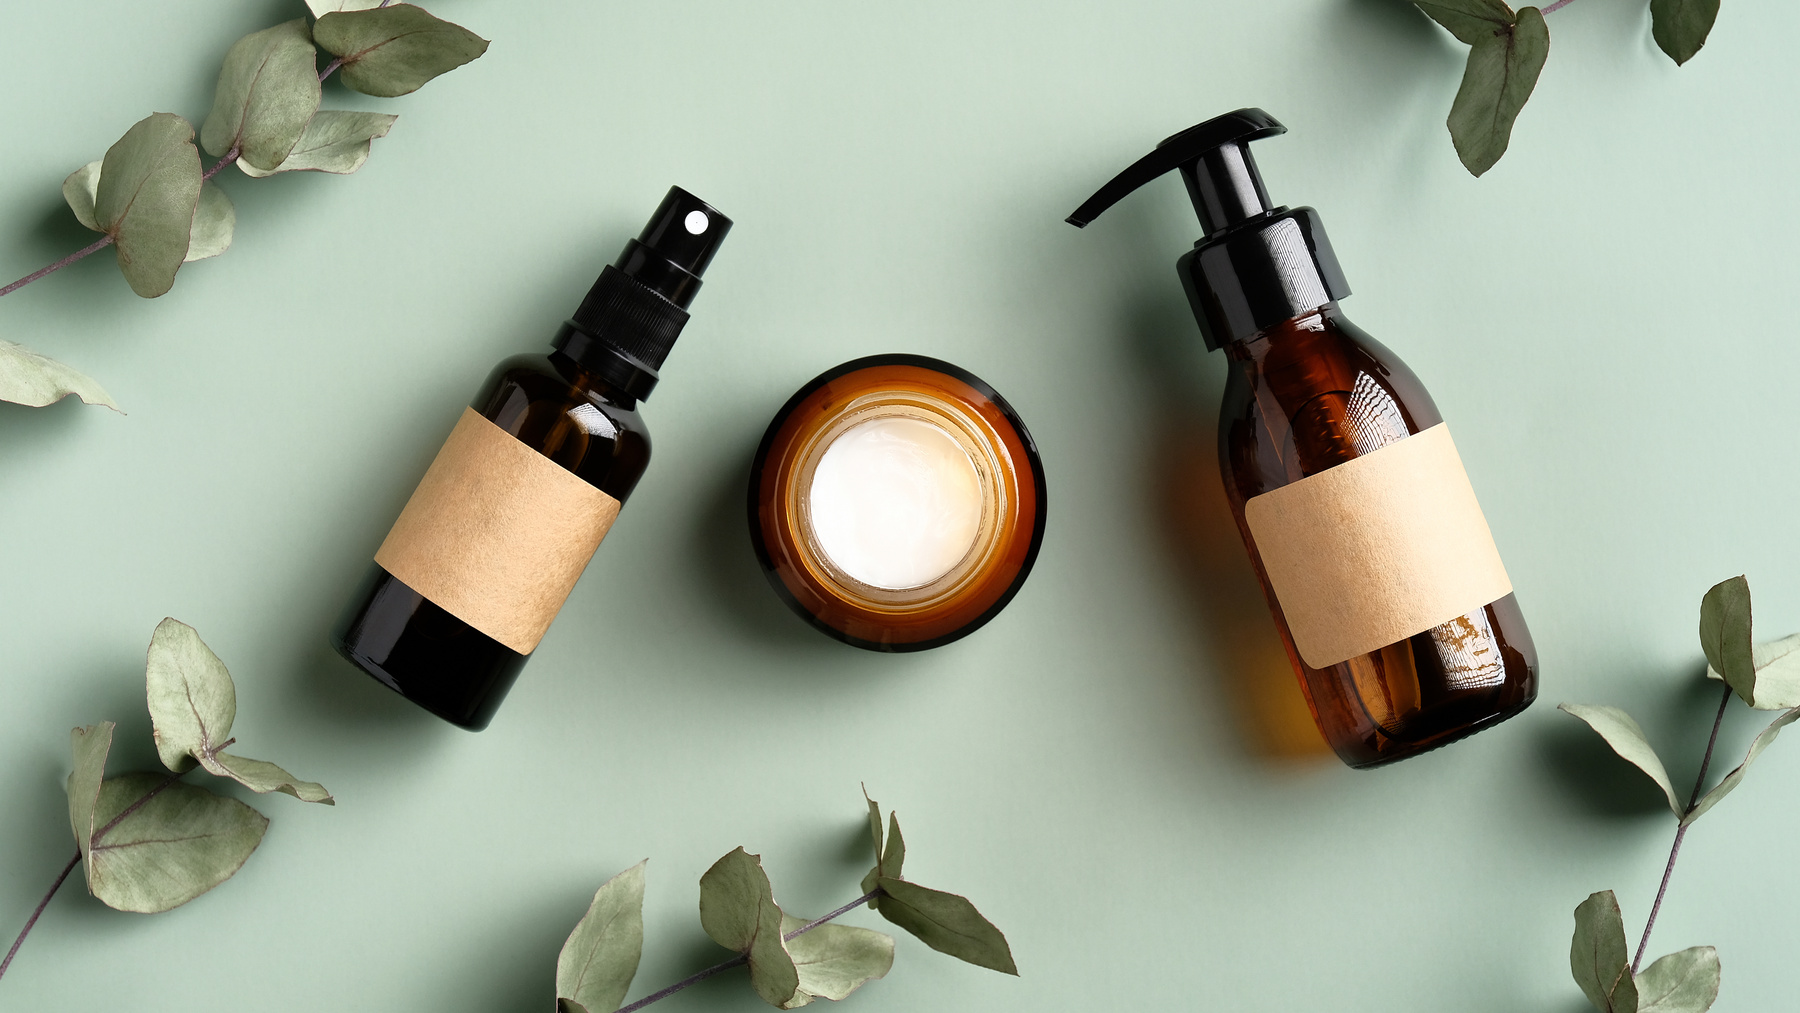 Herbal Skincare Cosmetics Set and Eucalyptus Leaves on Green Background. Amber Glass Body Spray Bottle, Liquid Soap Dispenser, Moisturizer Cream Jar. SPA Natural Organic Beauty Products Design.